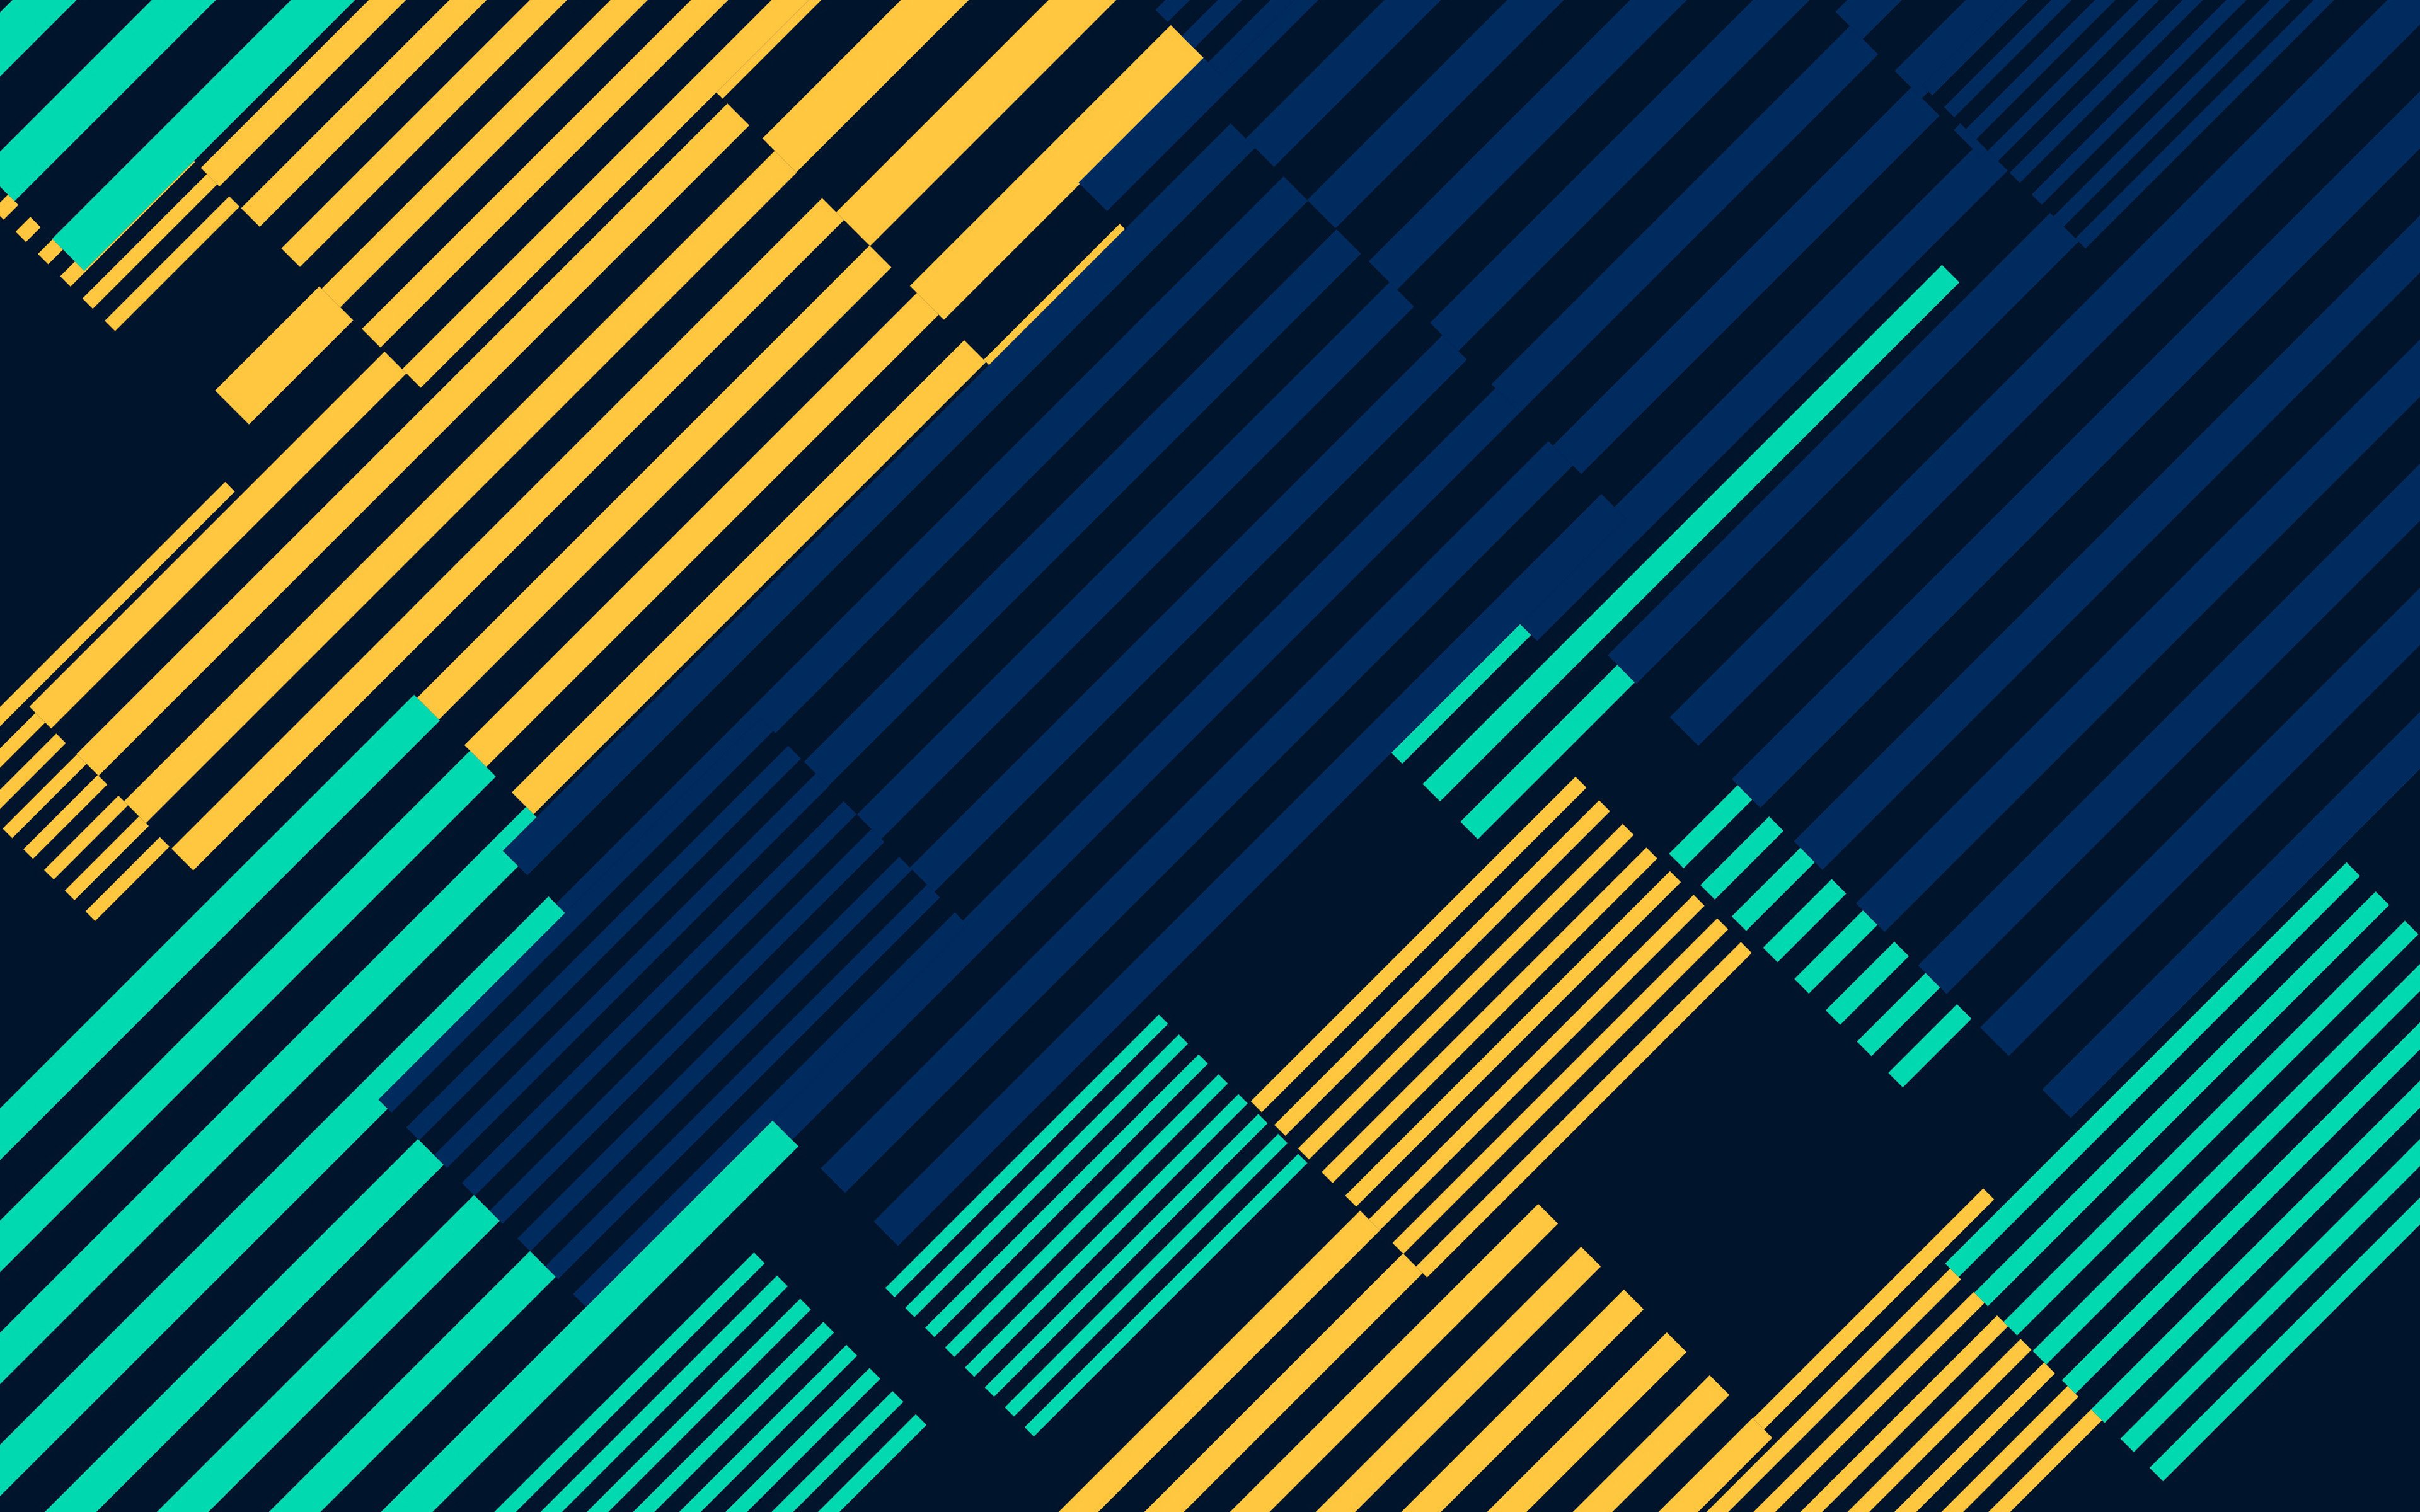 Download wallpaper colorful diagonal lines, 4k, material design, creative, linear patterns, geometric shapes, abstract background for desktop with resolution 3840x2400. High Quality HD picture wallpaper